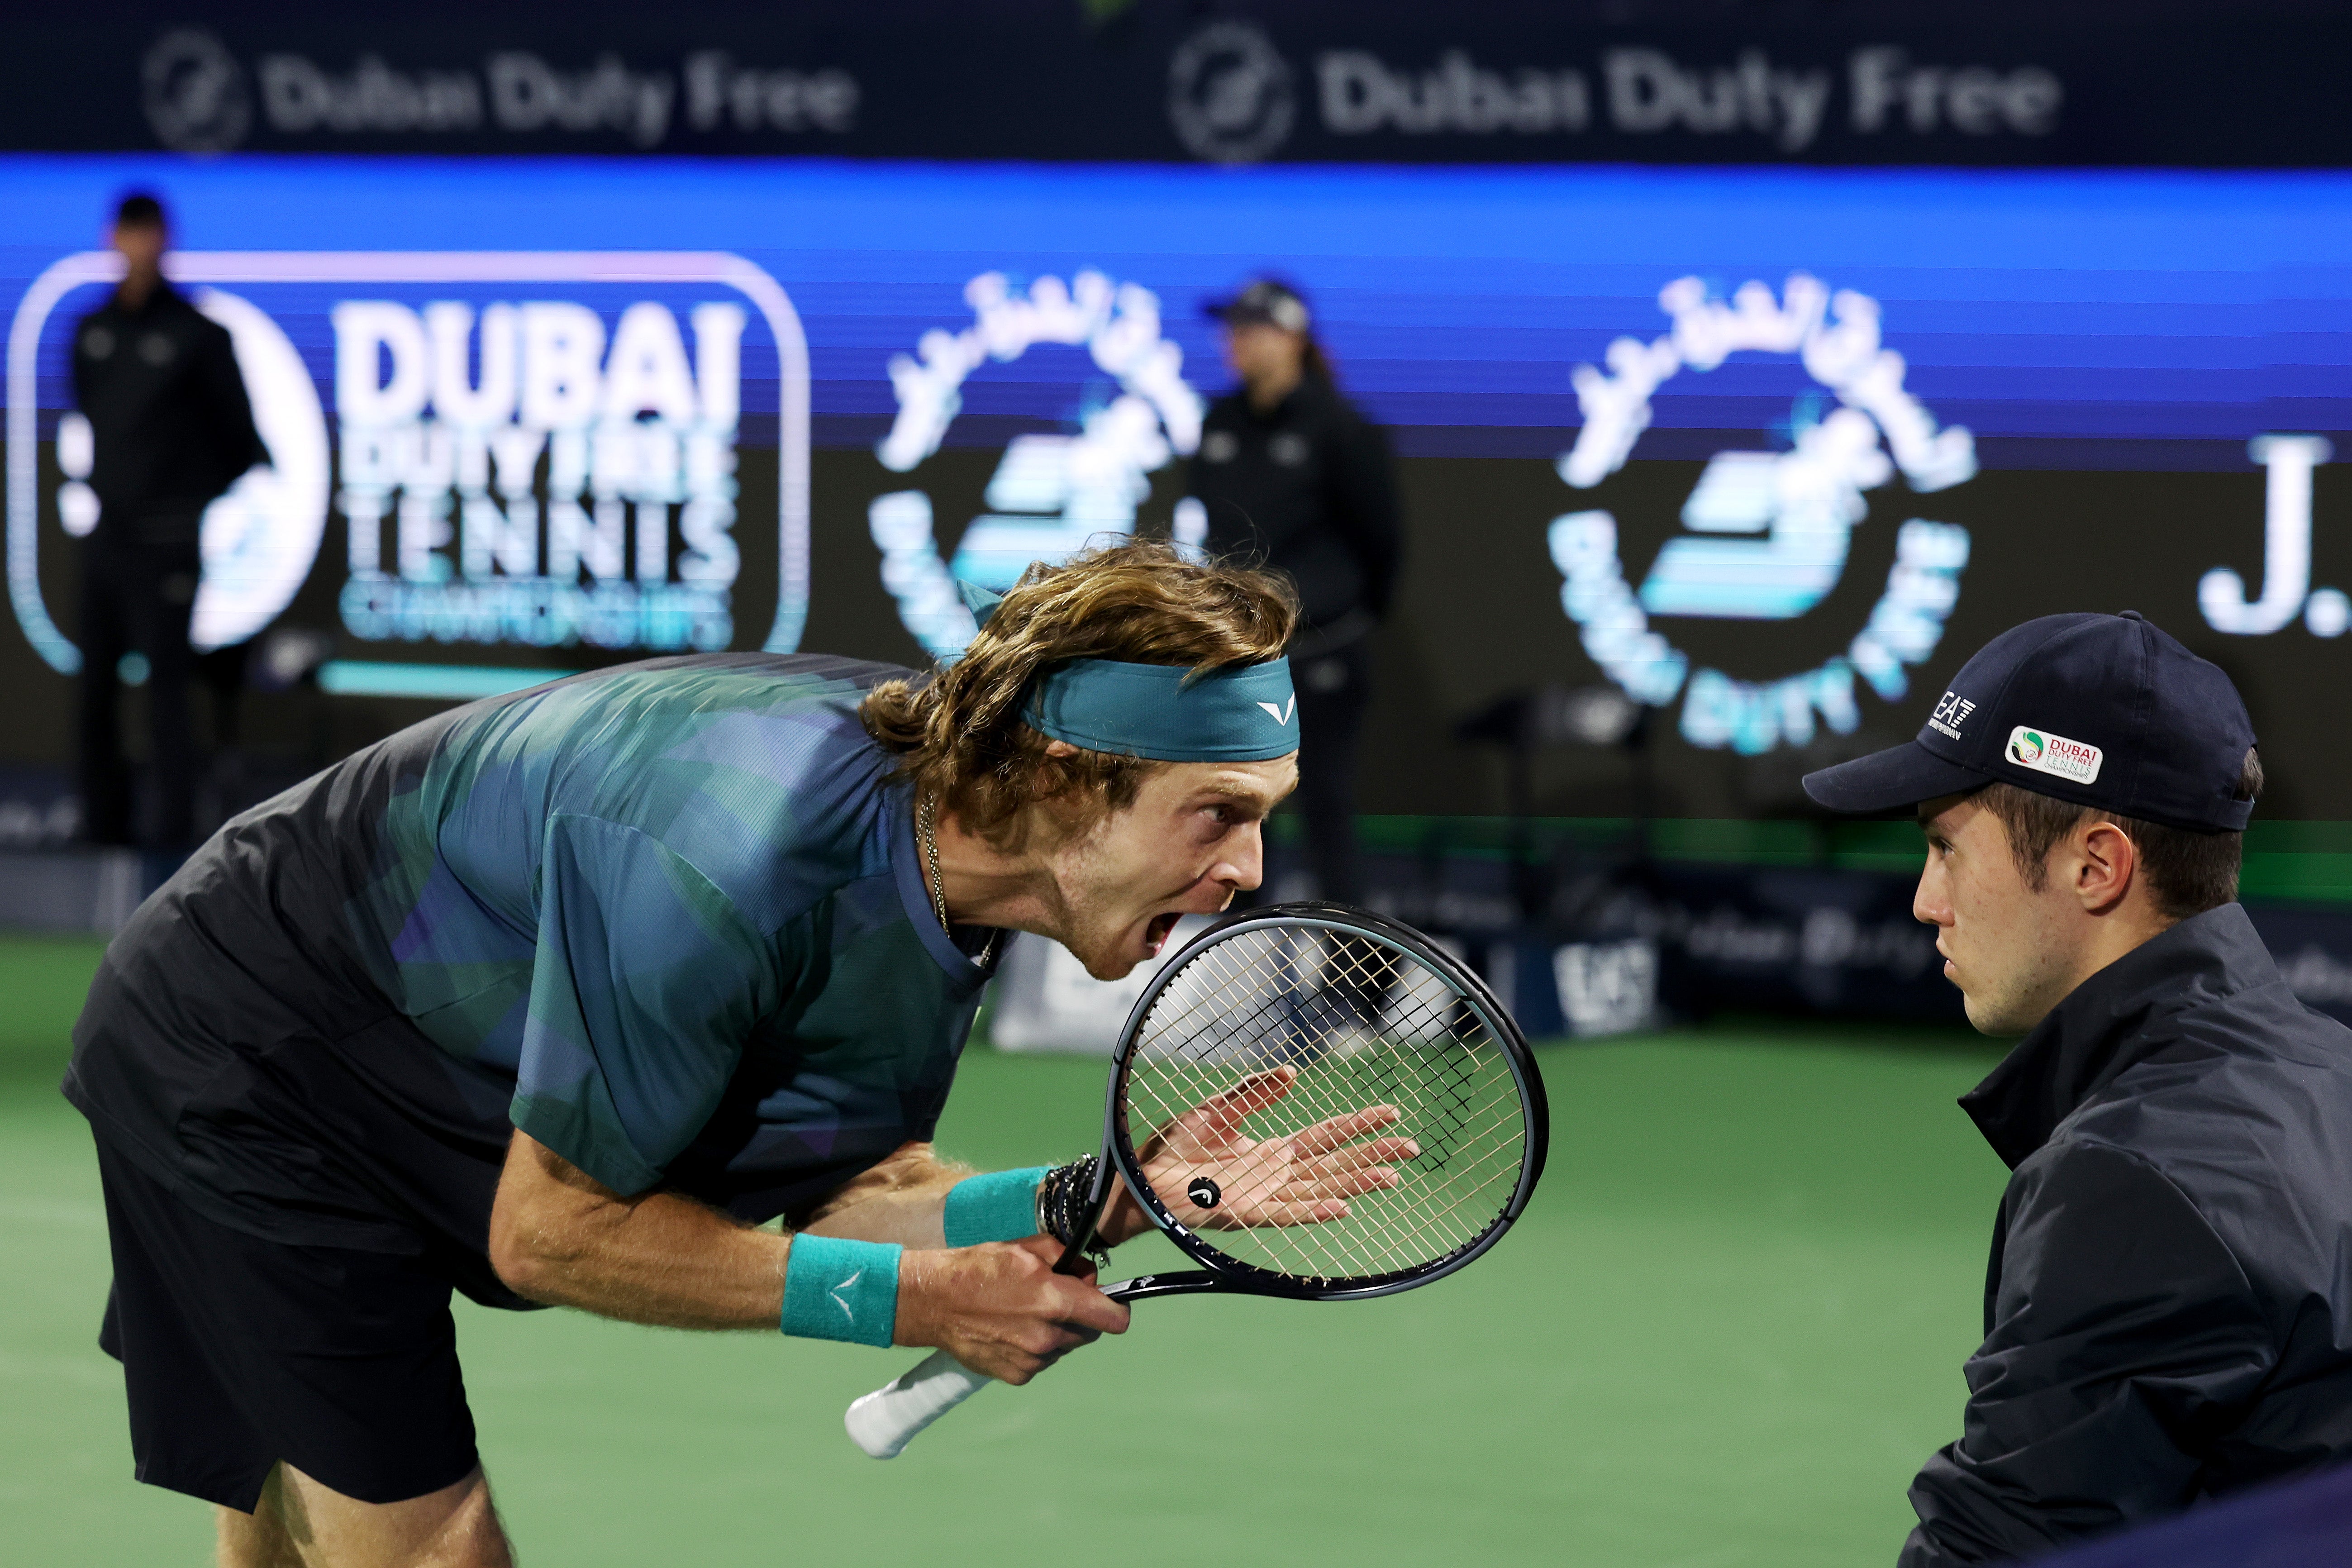 Andrey Rublev was defaulted from his semi-final against Alexander Bublik